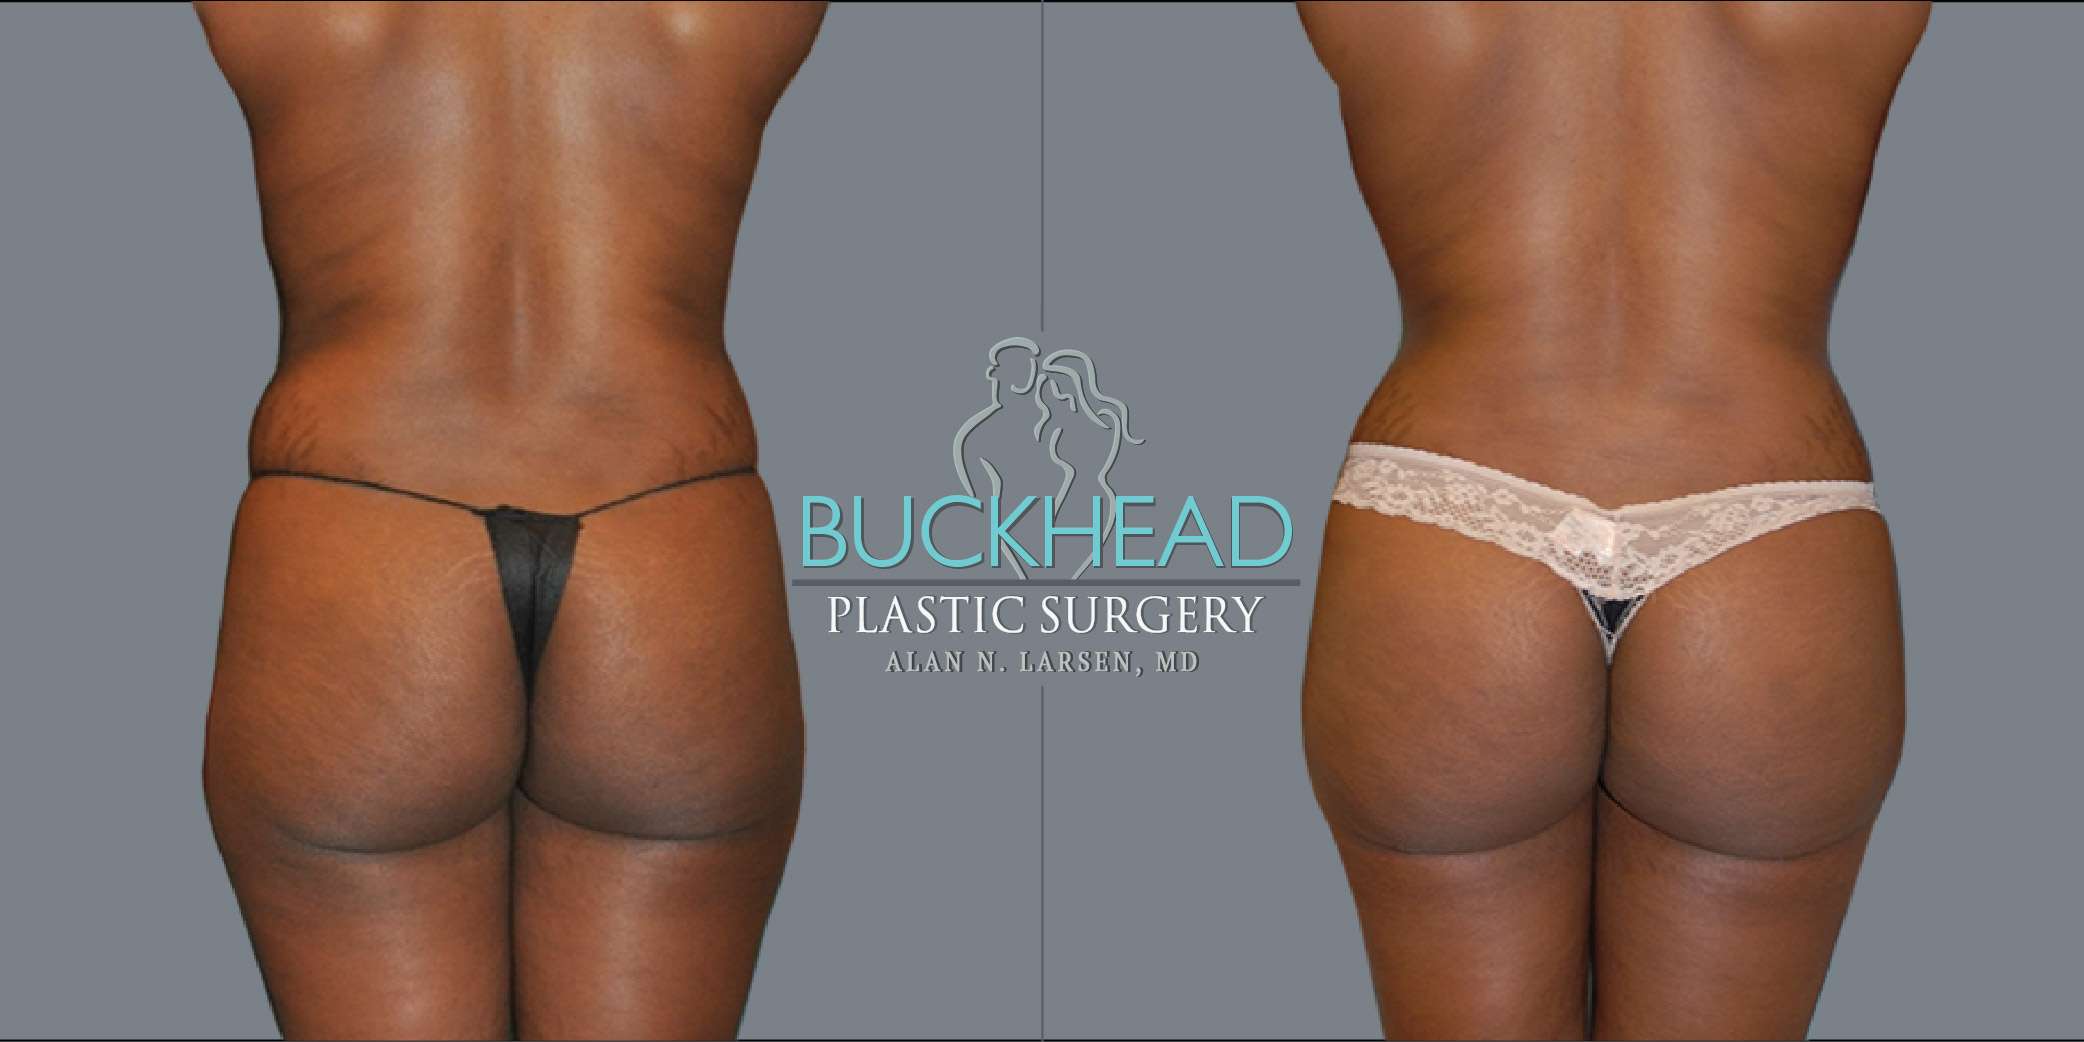 Before and After Photo gallery | Brazilian Butt Lift | Buckhead Plastic Surgery | Double Board-Certified Plastic Surgeon in Atlanta GA